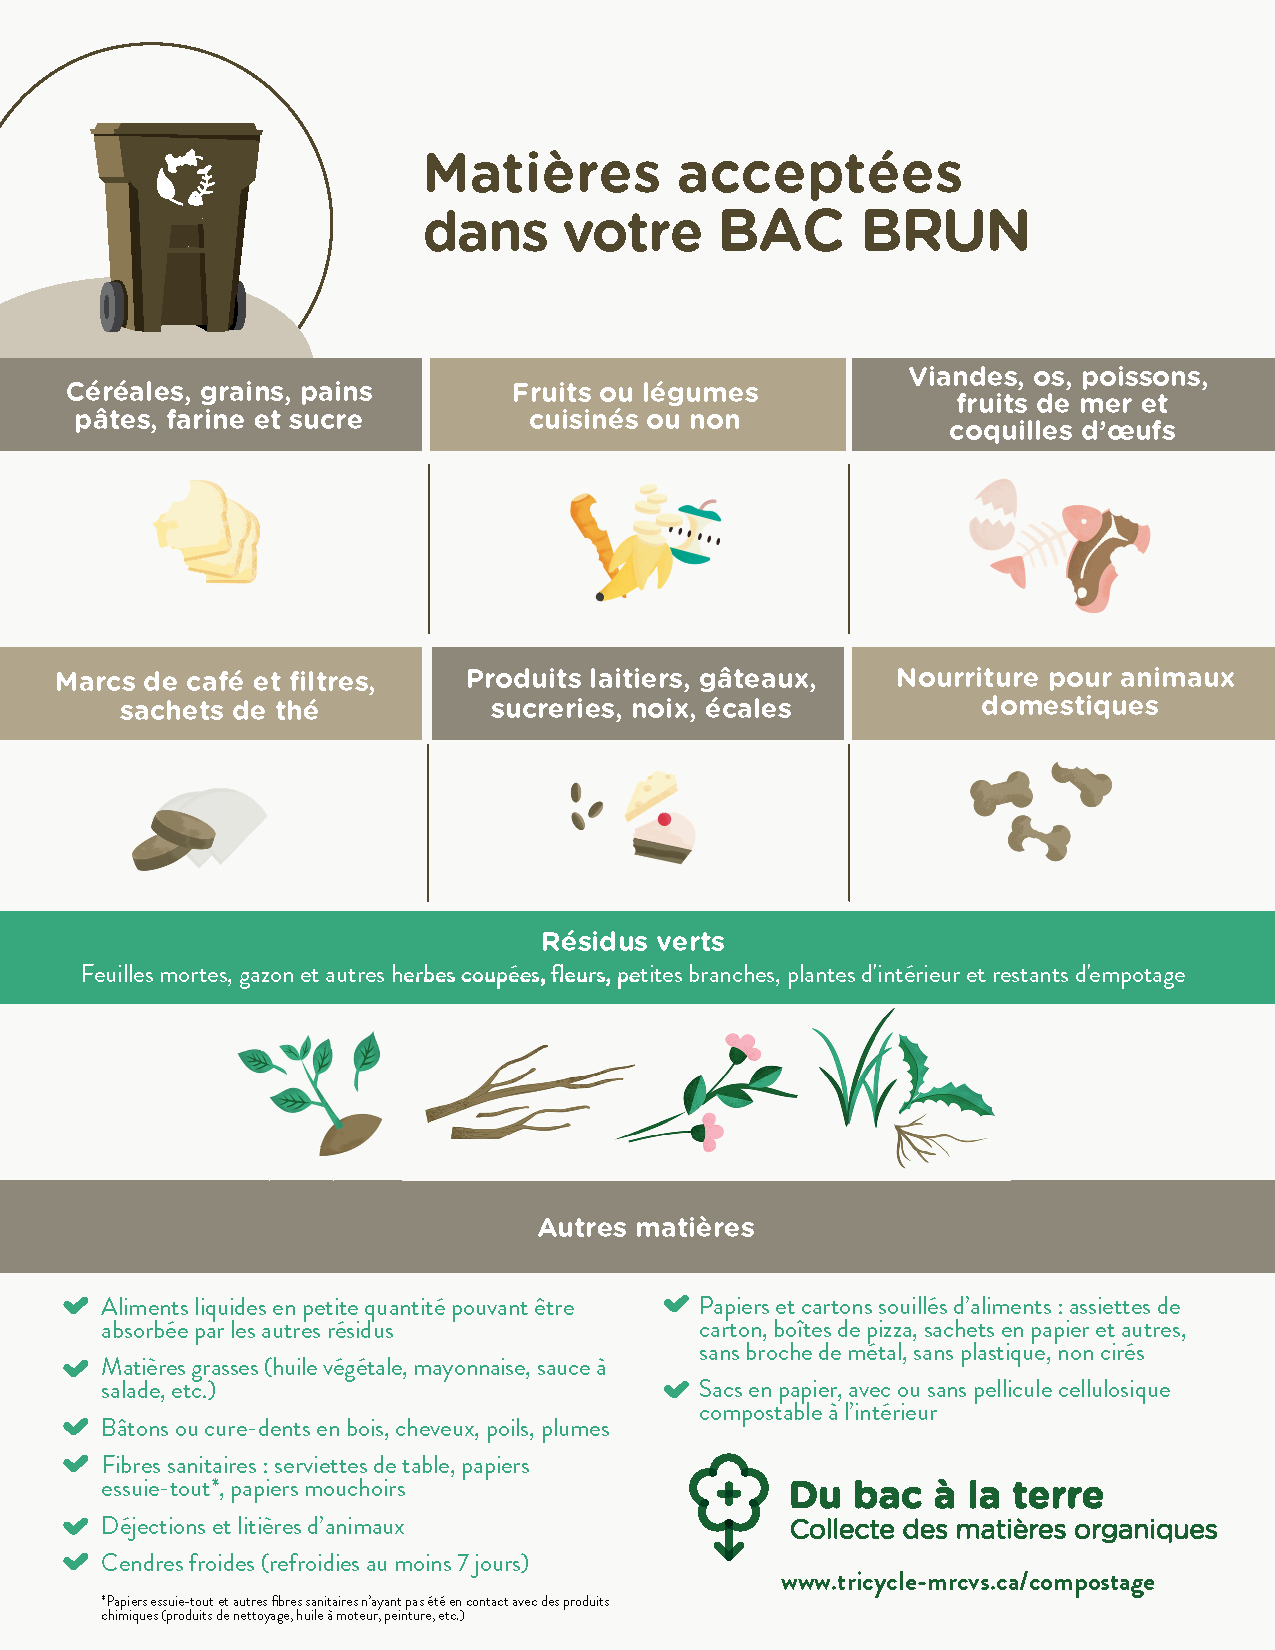 Matieres-acceptees-bac-brun-FR.png (202 KB)